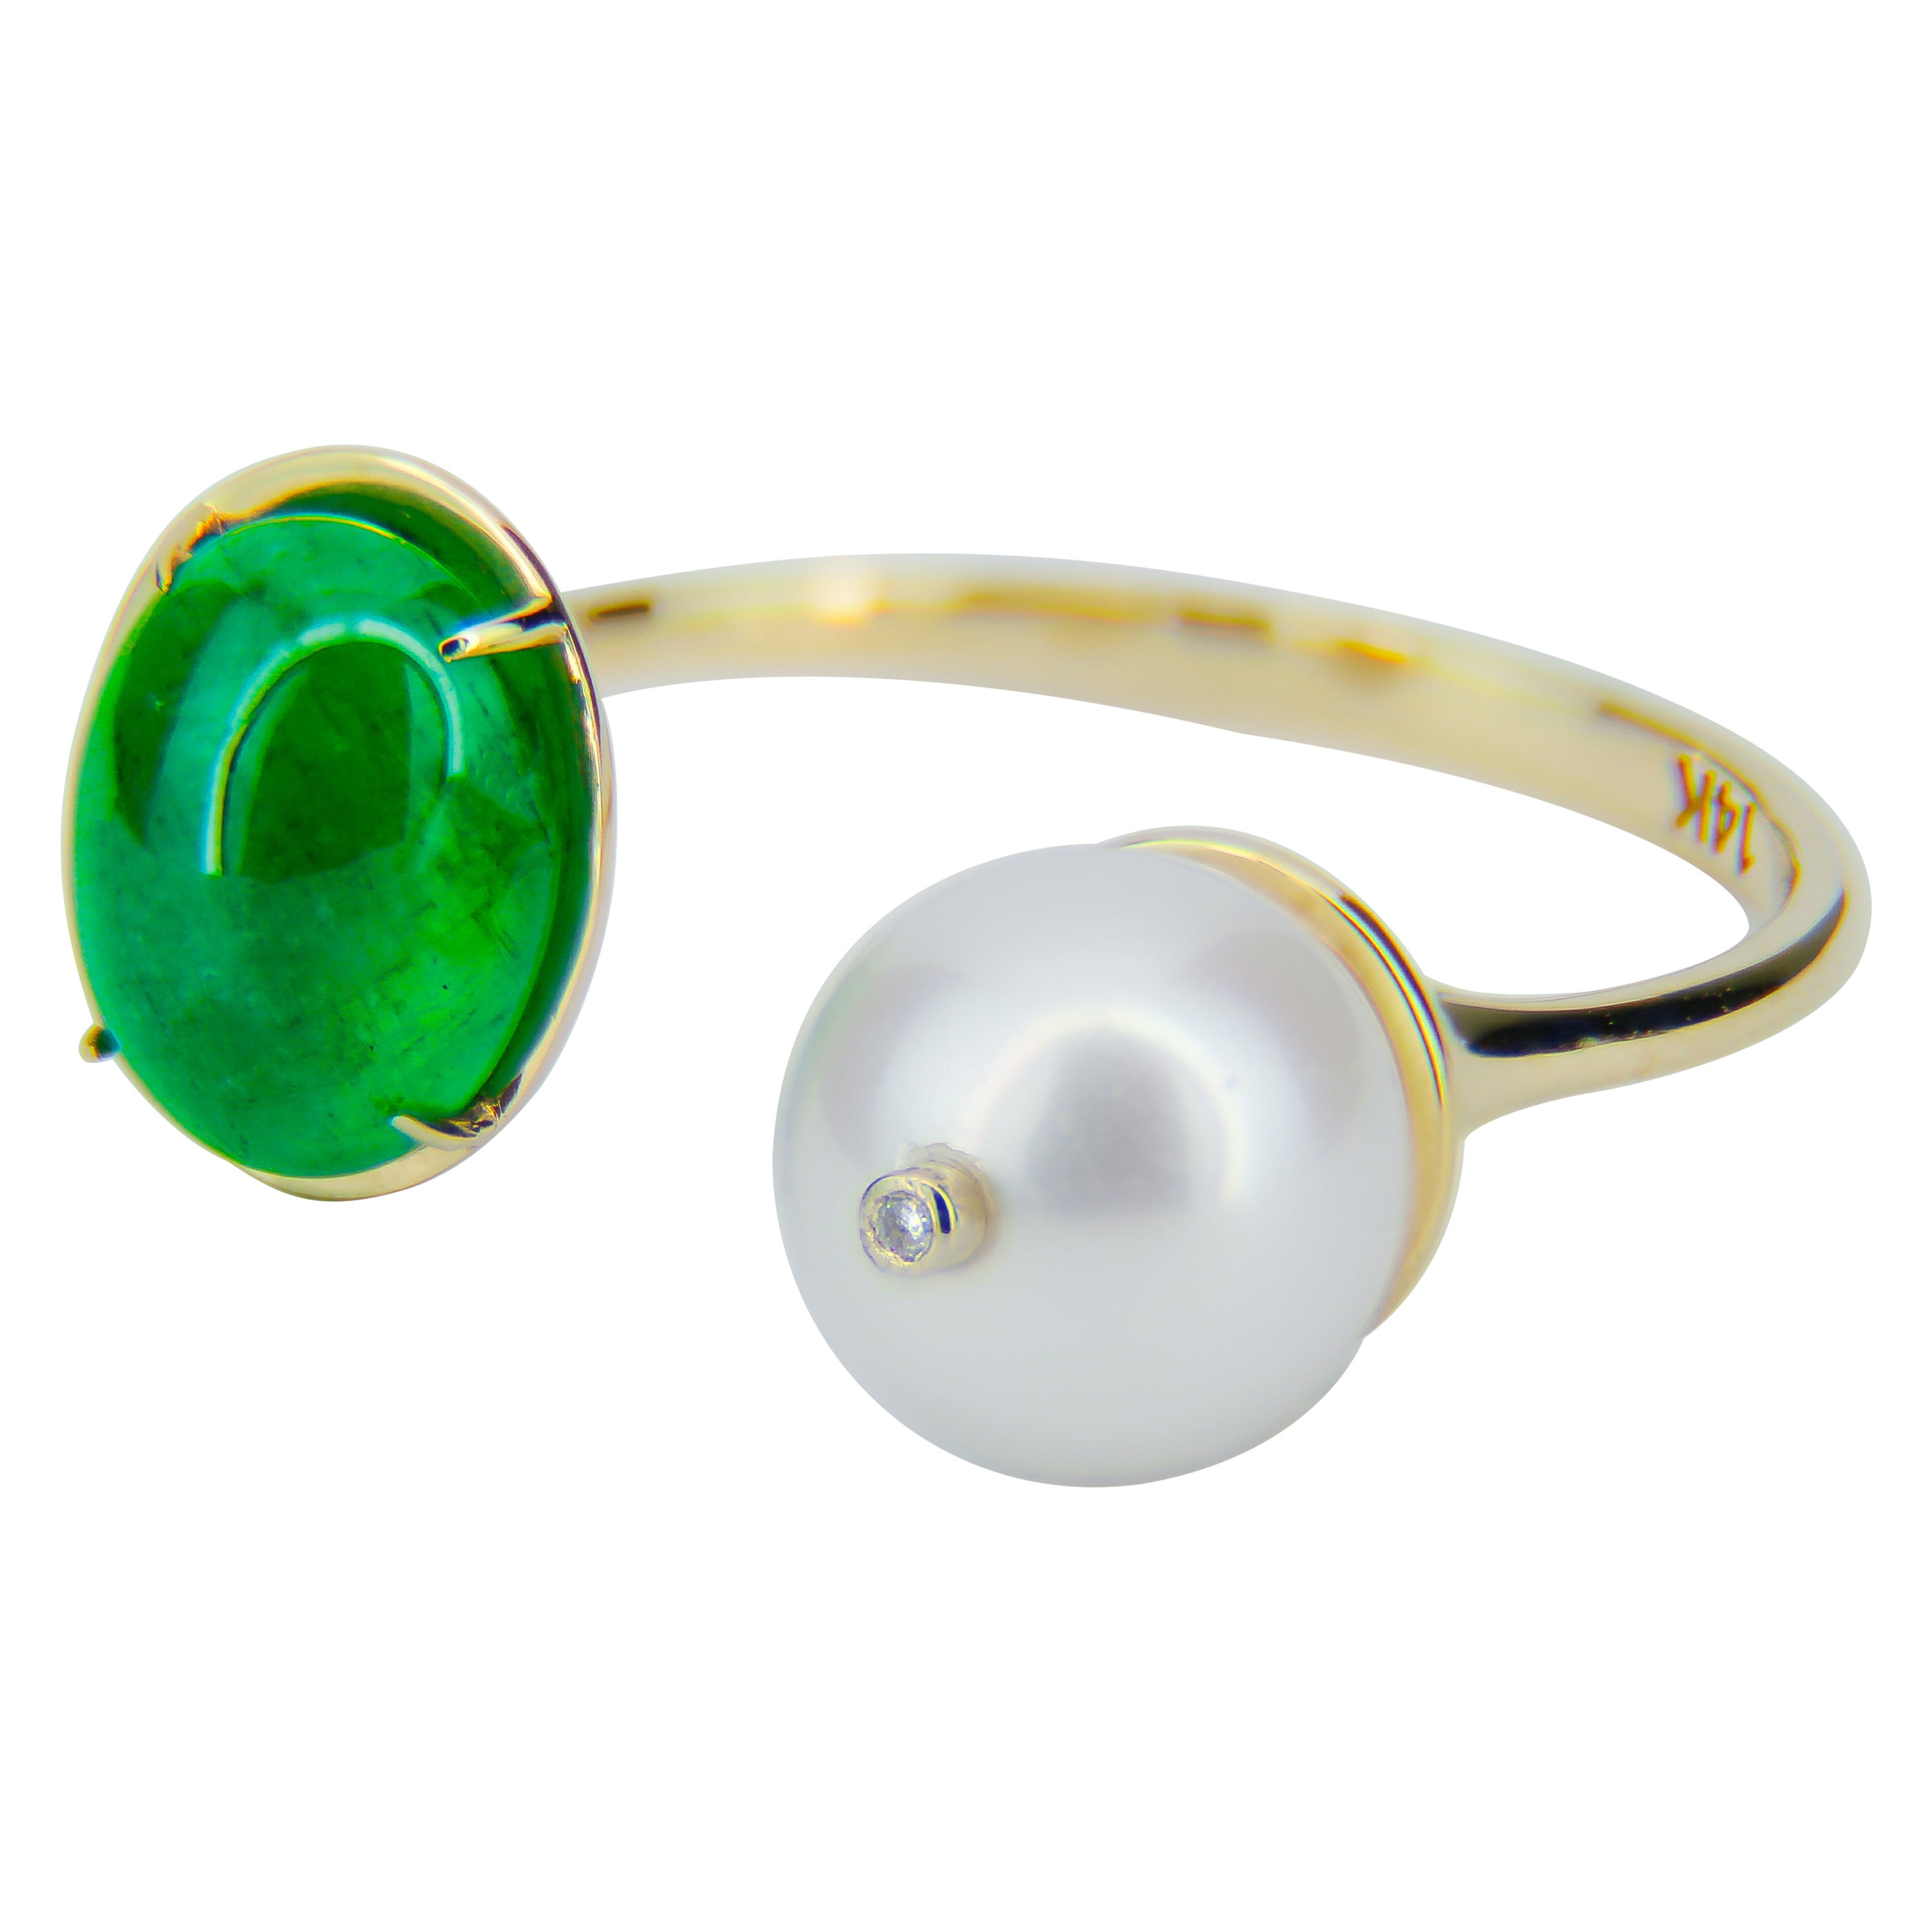 For Sale:  Emerald and Pearl 14k gold ring. Adjustable emerald ring